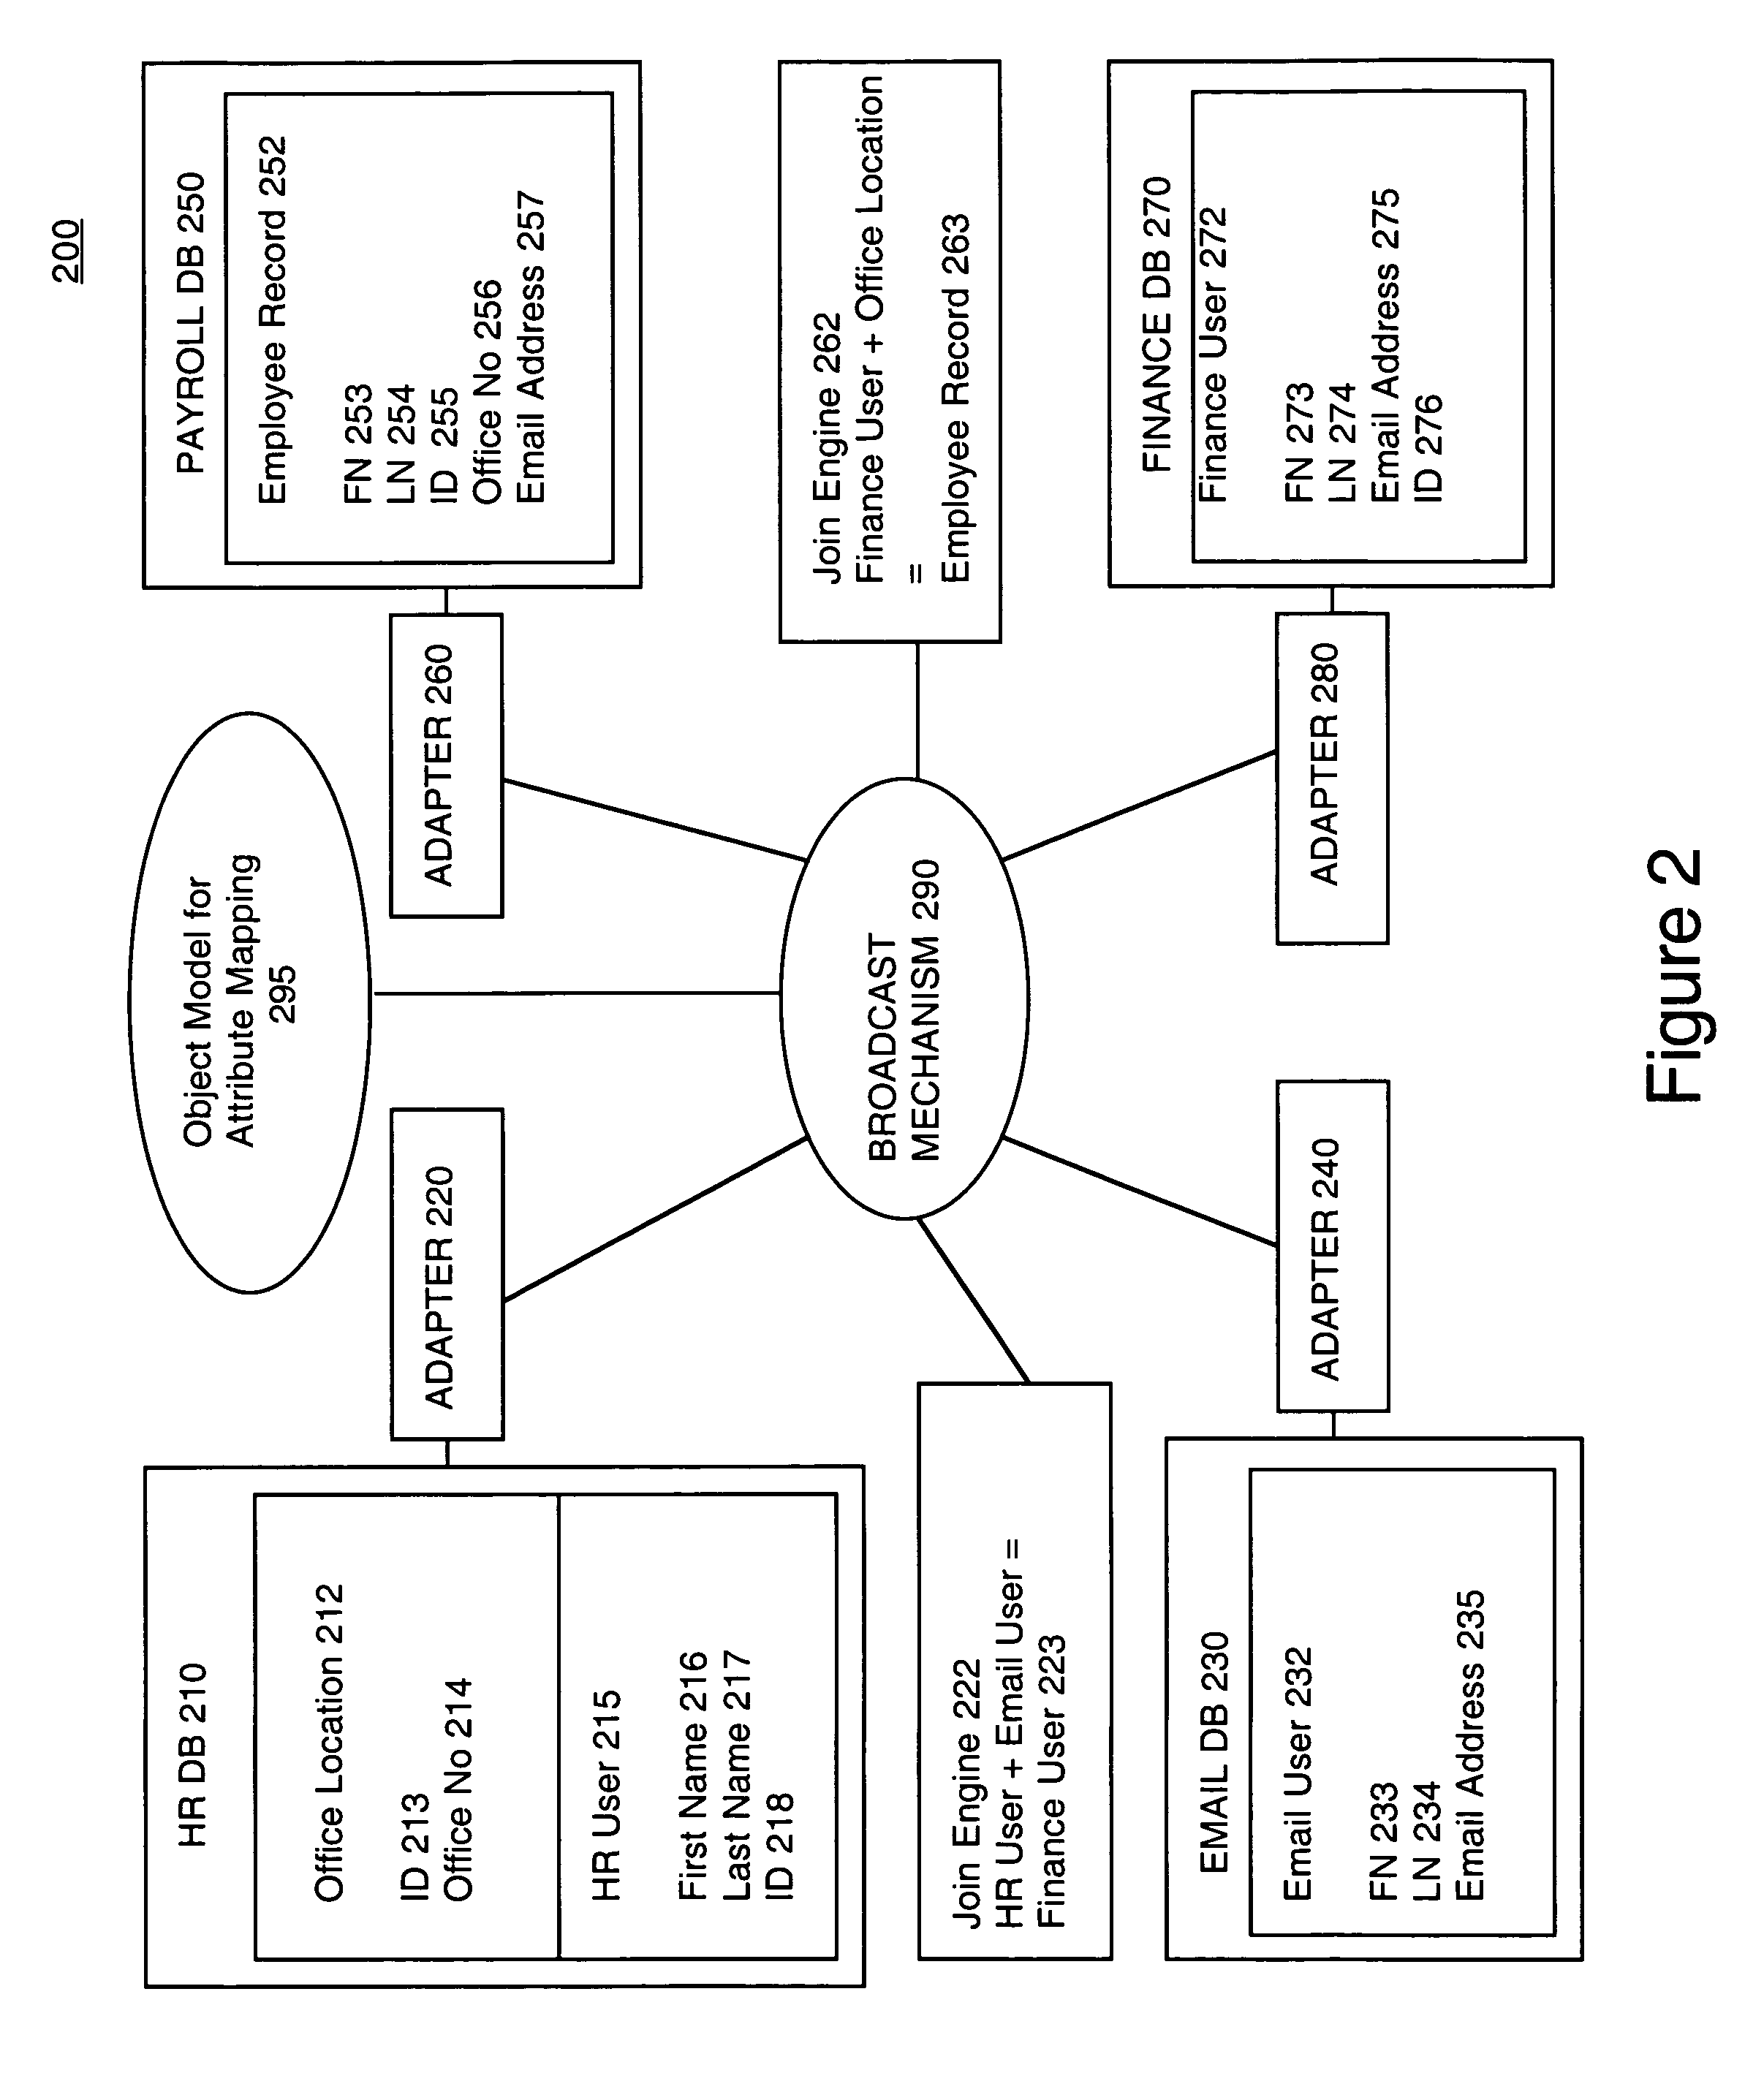 Global attribute mapping data in an enterprise information system